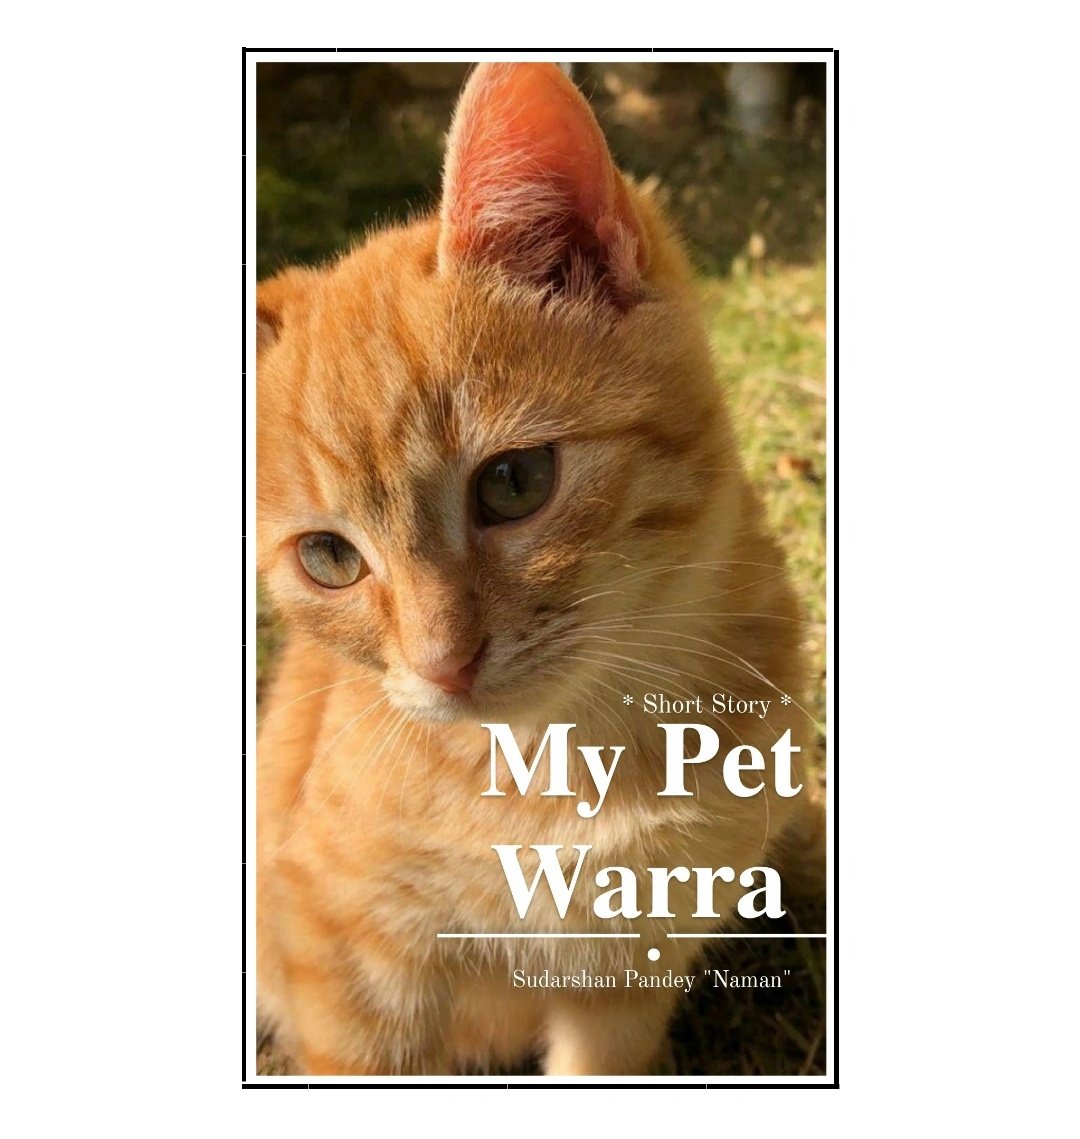 Official cover of book
'My Pet Warra ' *Short Story*
Out now Publicly
Book will be release on June 12th 2024
Only on Googleplaybook and Googleplaystore